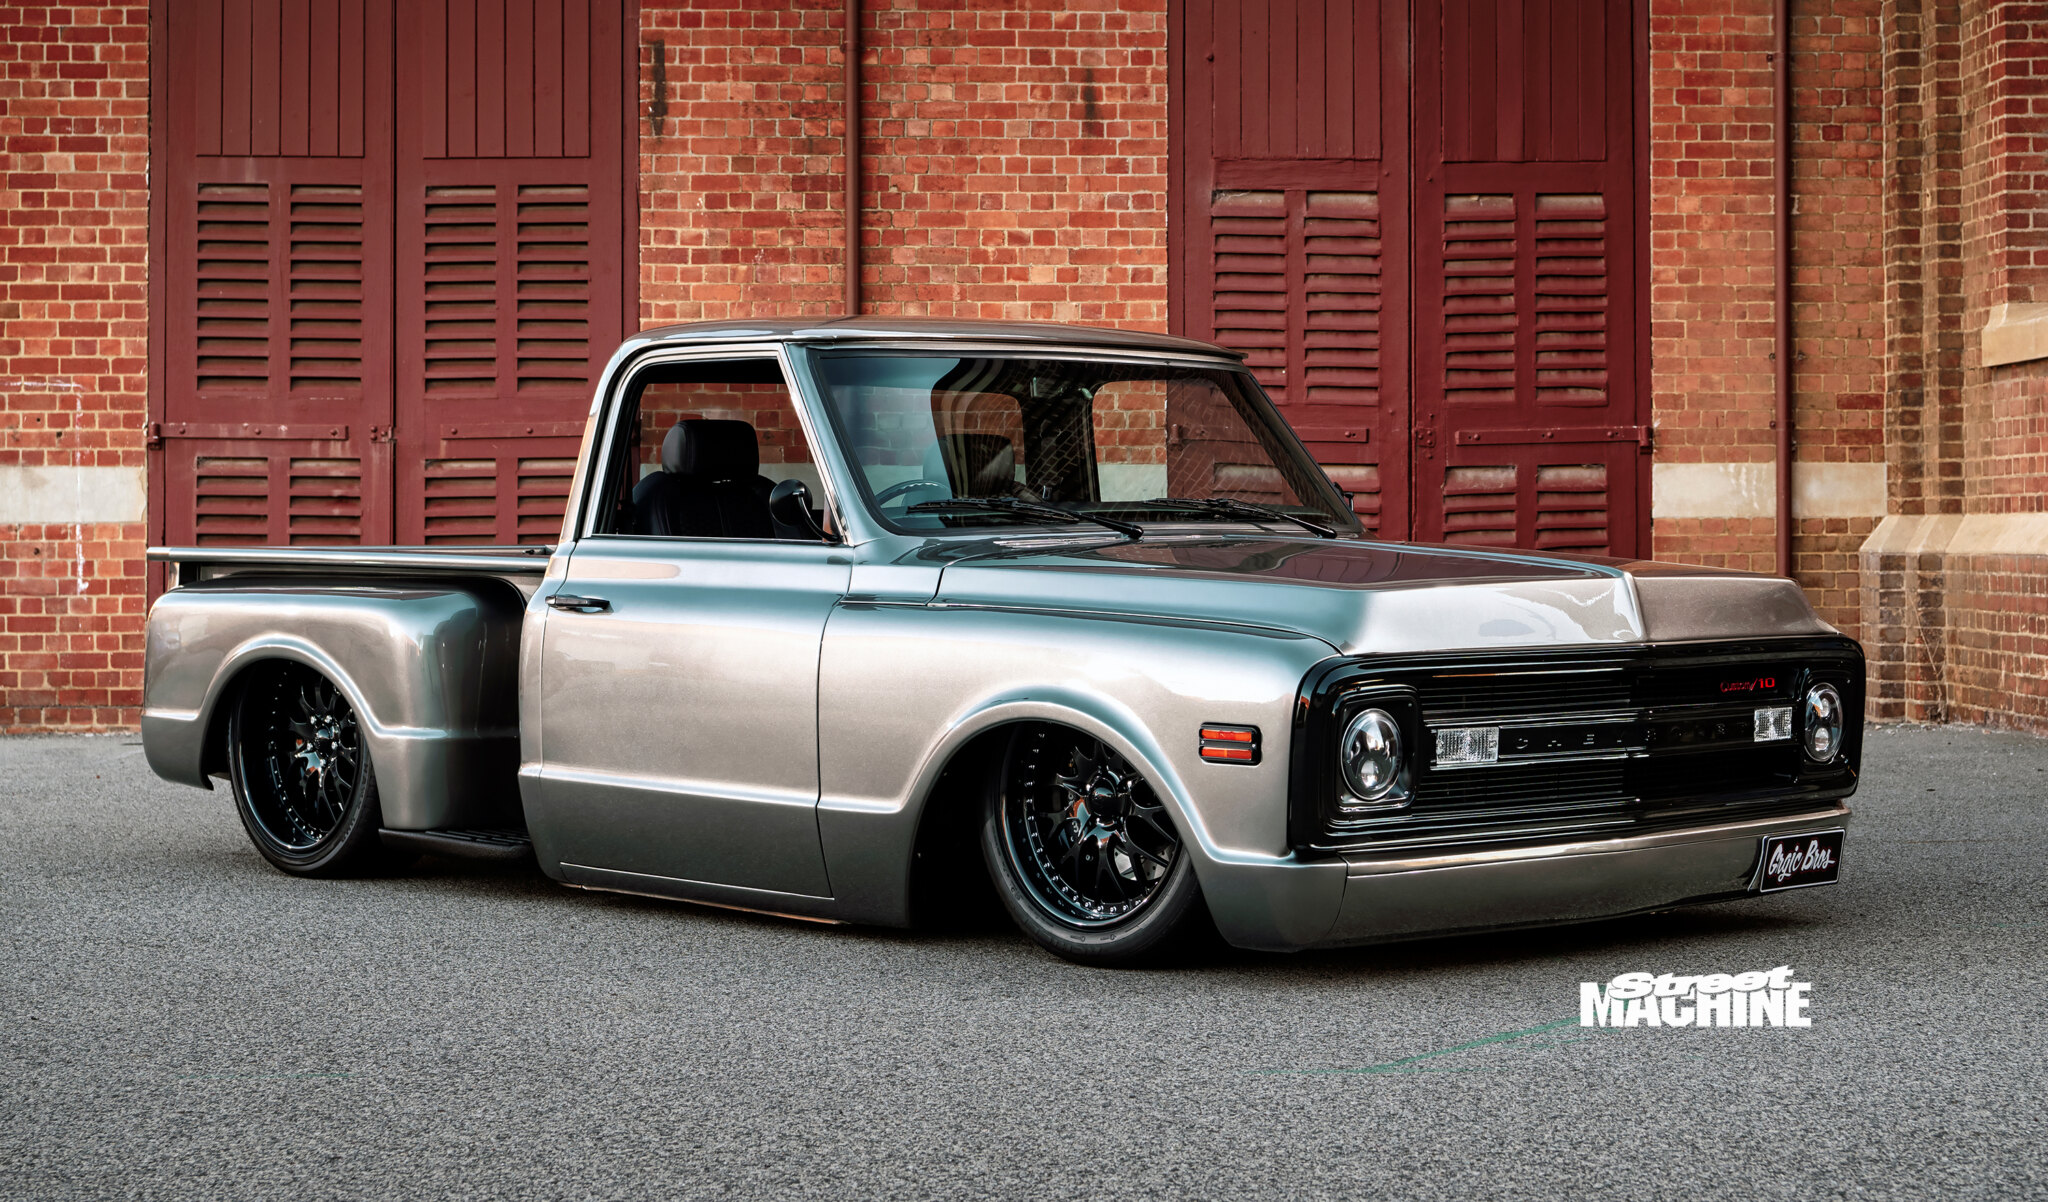 LSA-swapped C10 shortbed pick-up